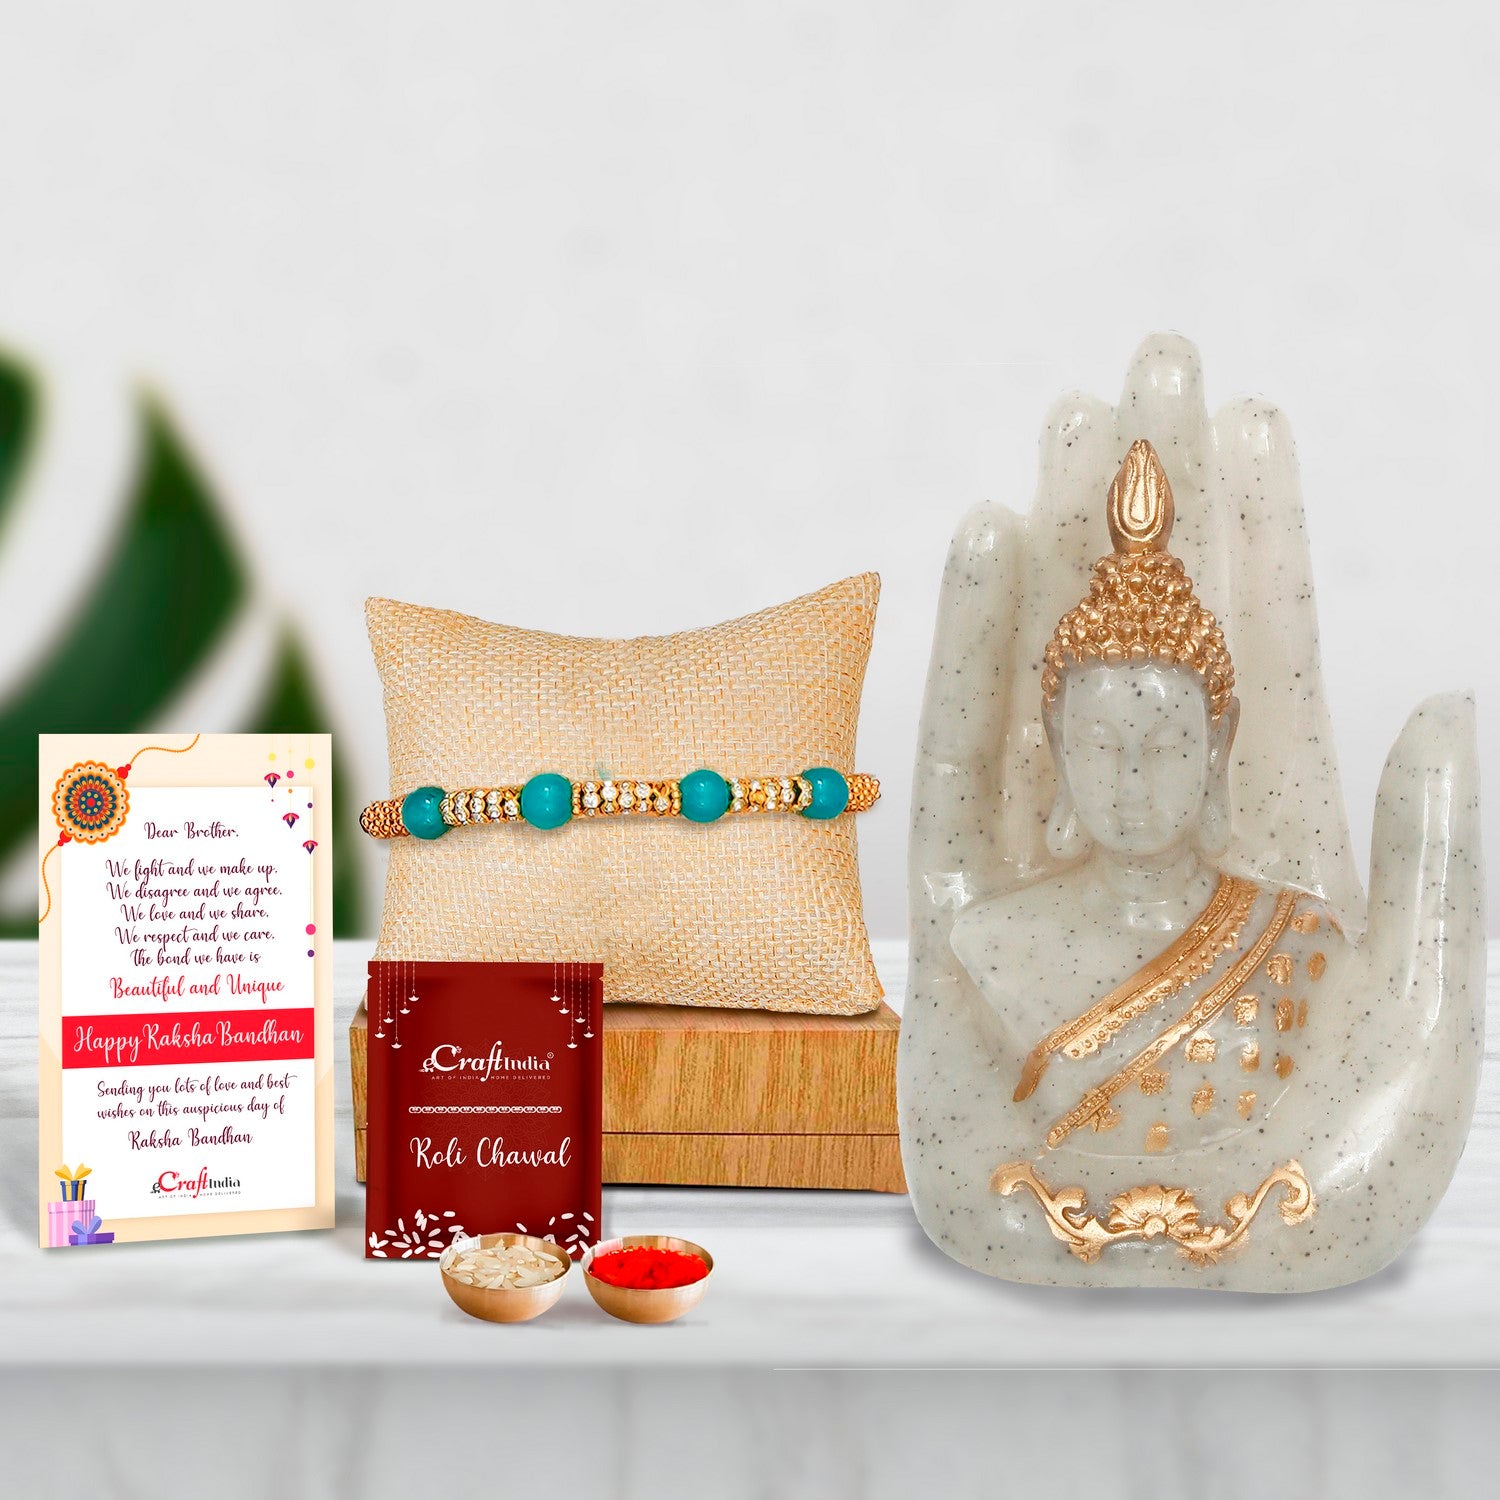 Designer Pearl Rakhi with Golden Silver Handcrafted Palm Buddha Showpiece and Roli Chawal Pack, Best Wishes Greeting Card